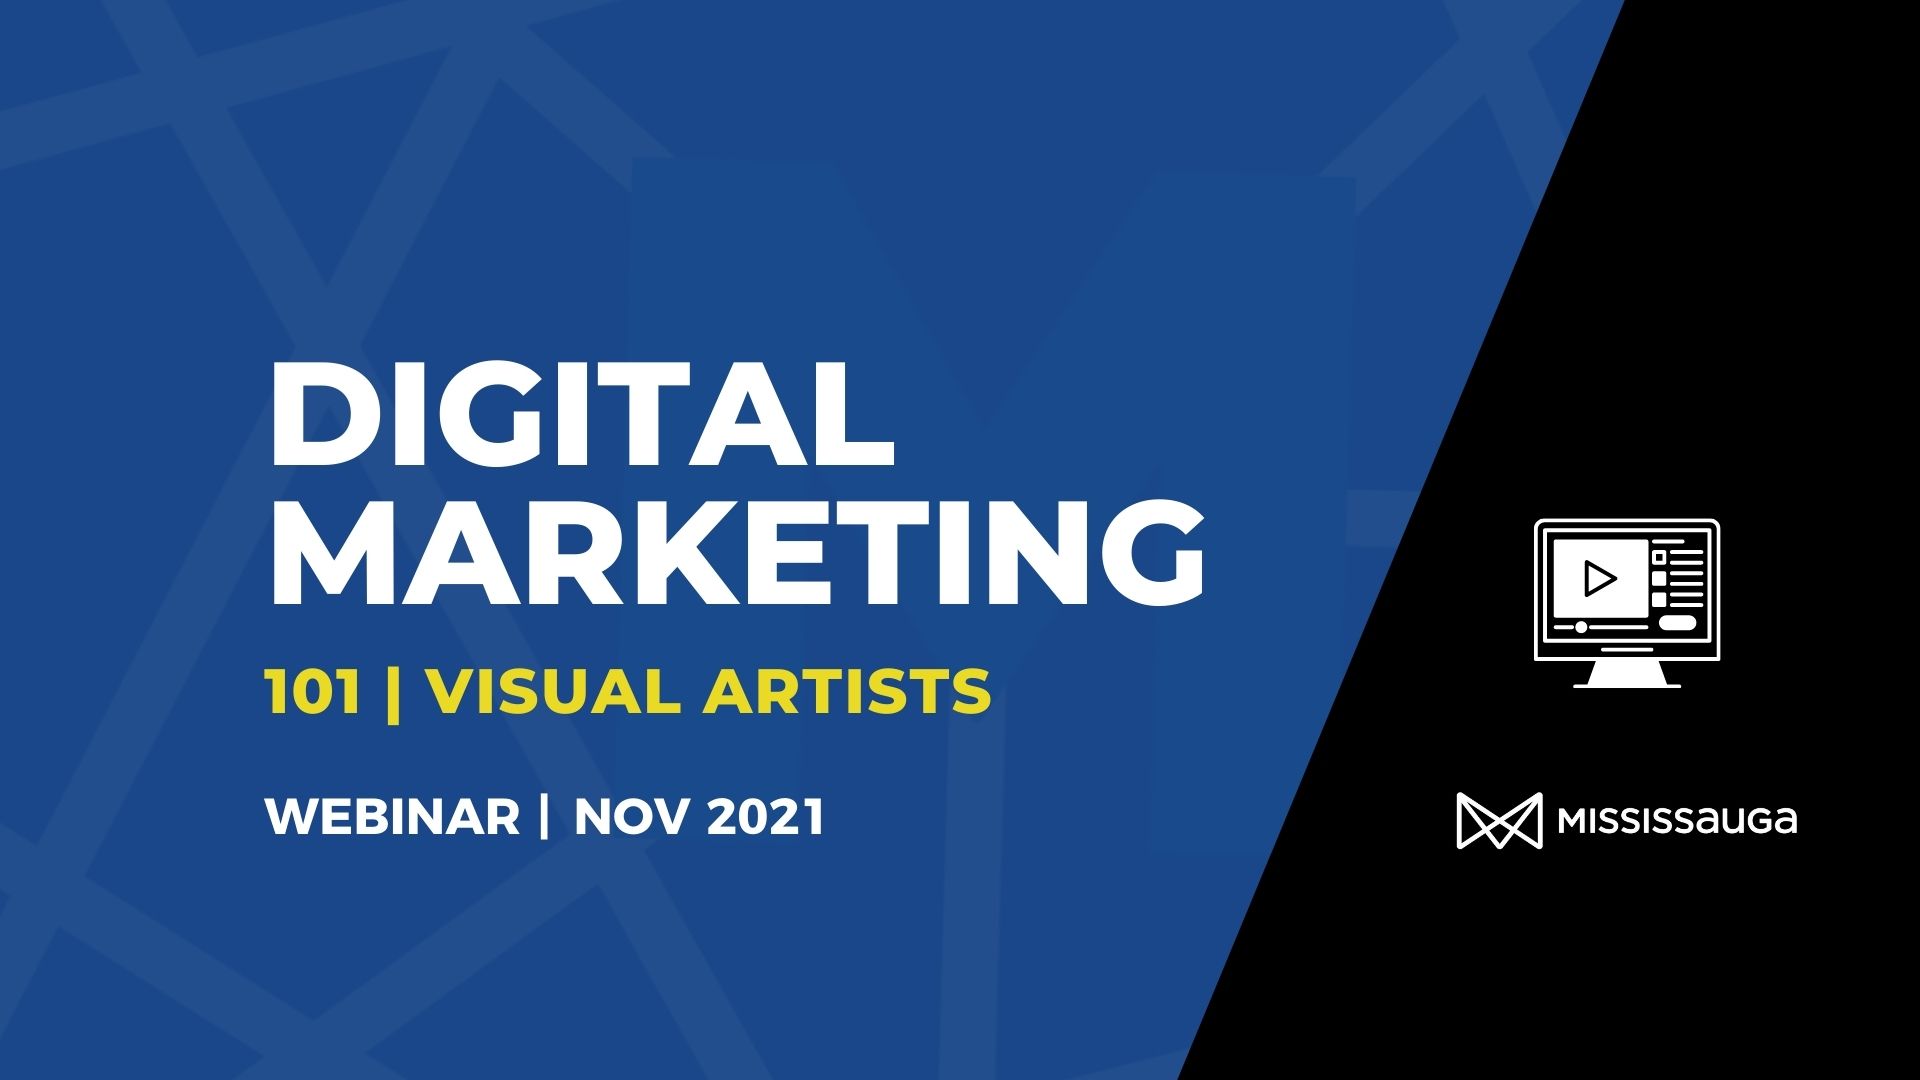 You are currently viewing Digital Marketing for Visual Artists – Webinar Nov 2